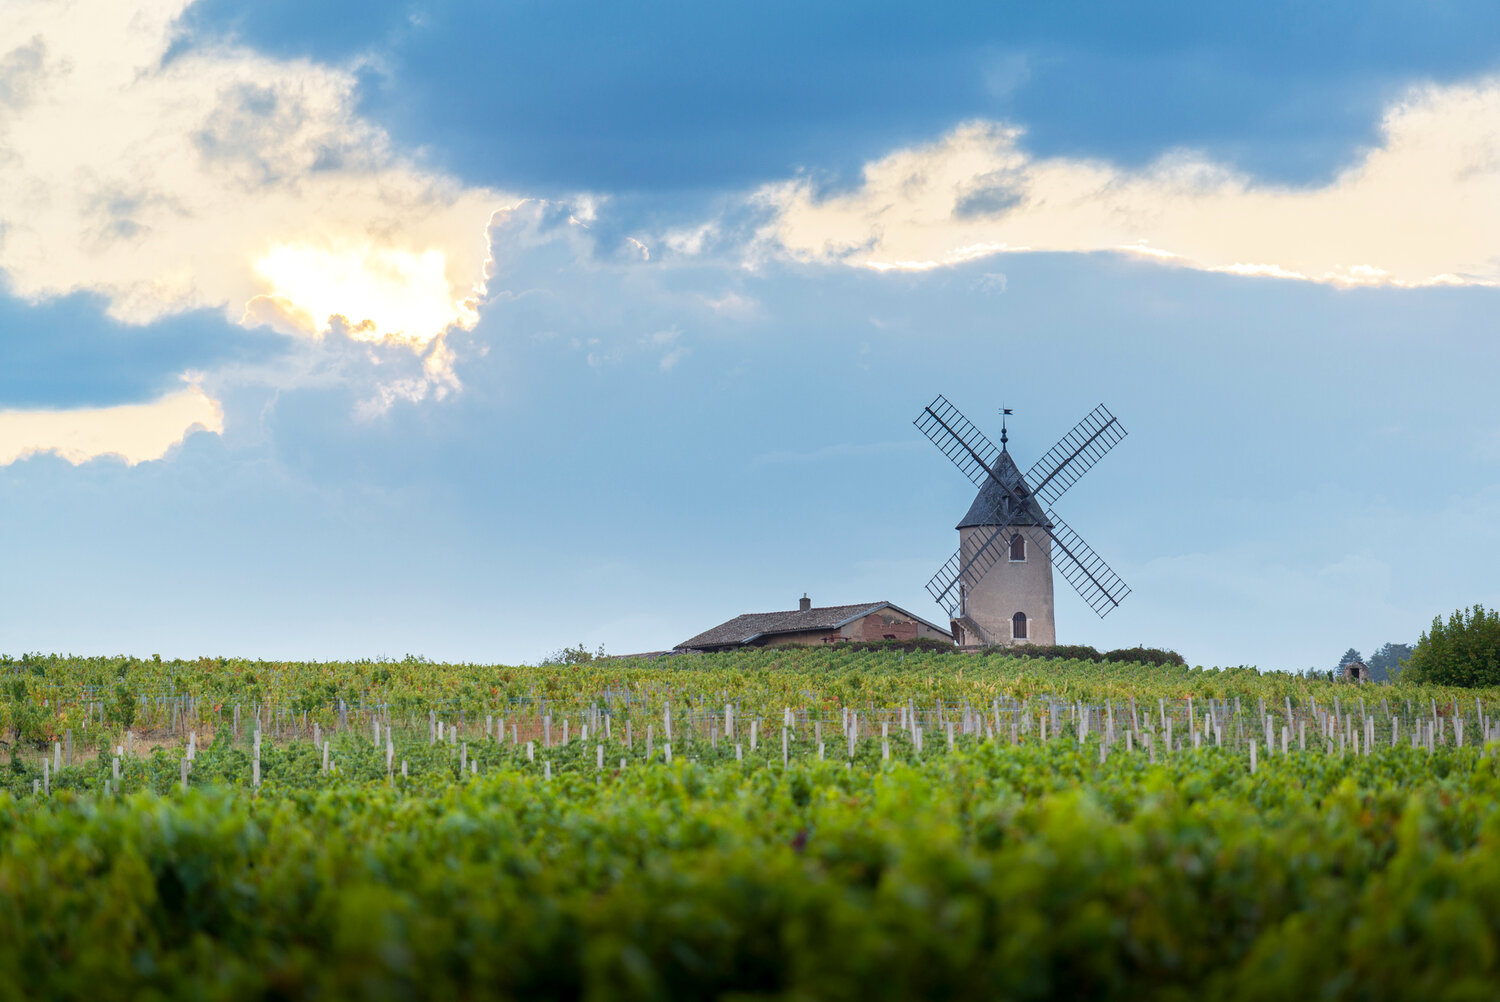 The Beaujolais wines of Moulin-à-Vent are considered by many the most tannic in the region and are long-lived, sometimes up to 50 years.